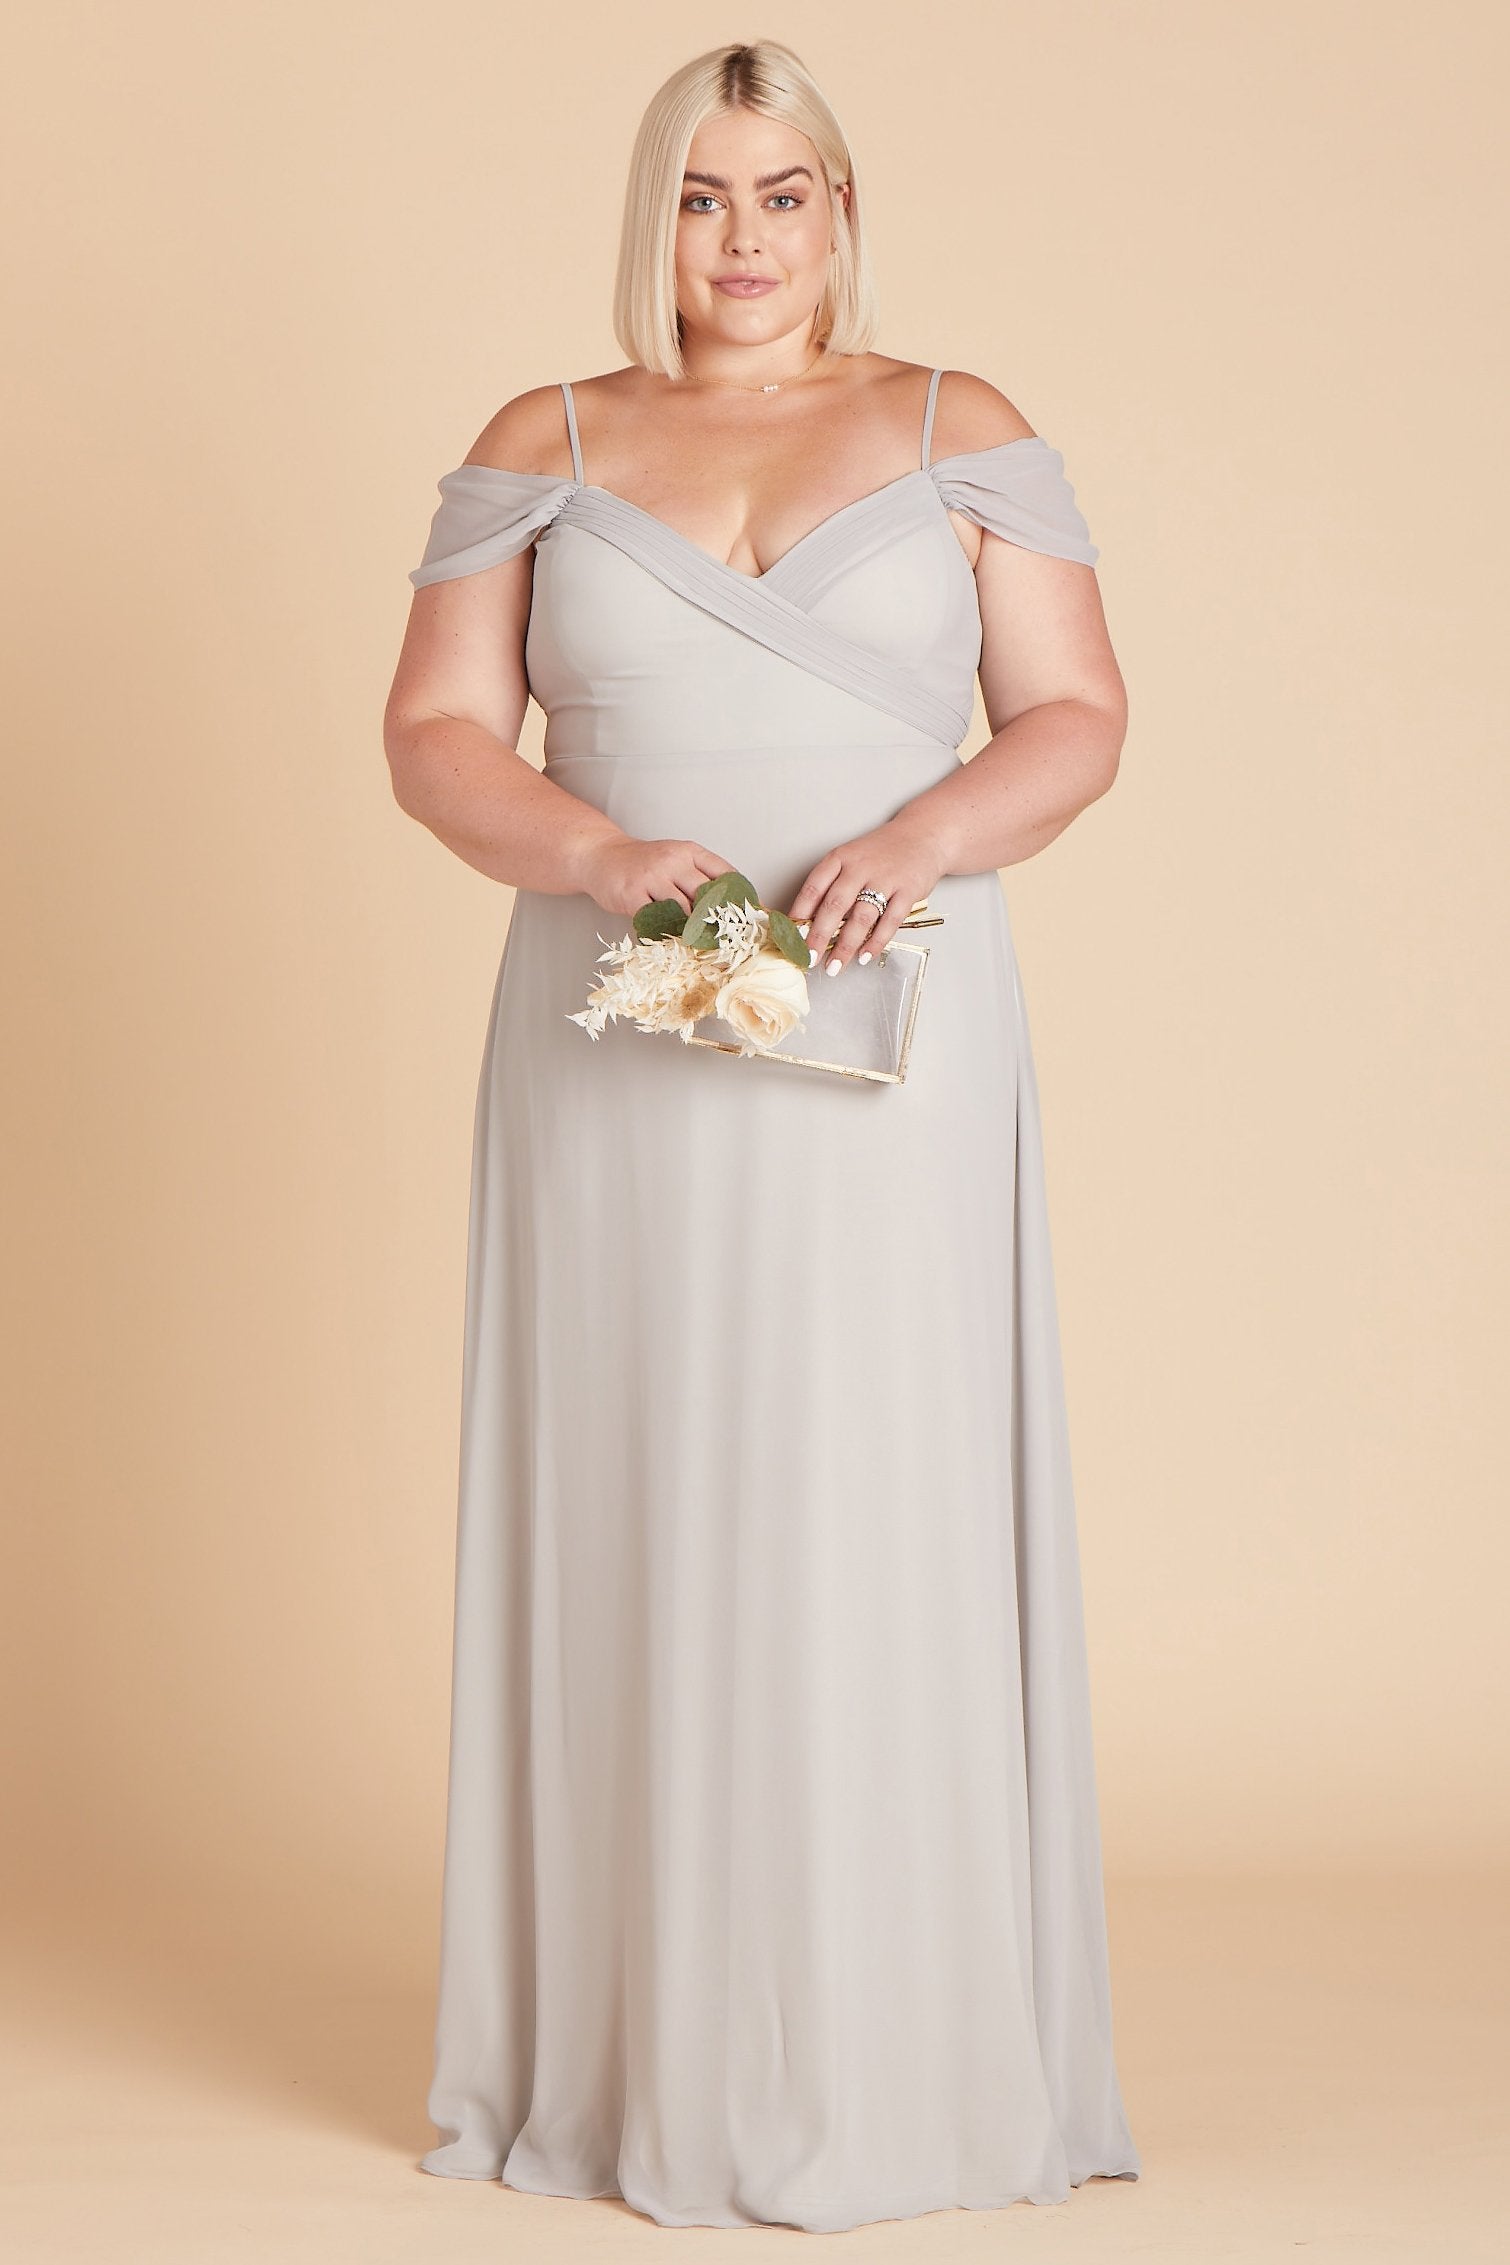 Spence convertible plus size bridesmaid dress in silver chiffon by Birdy Grey, front view